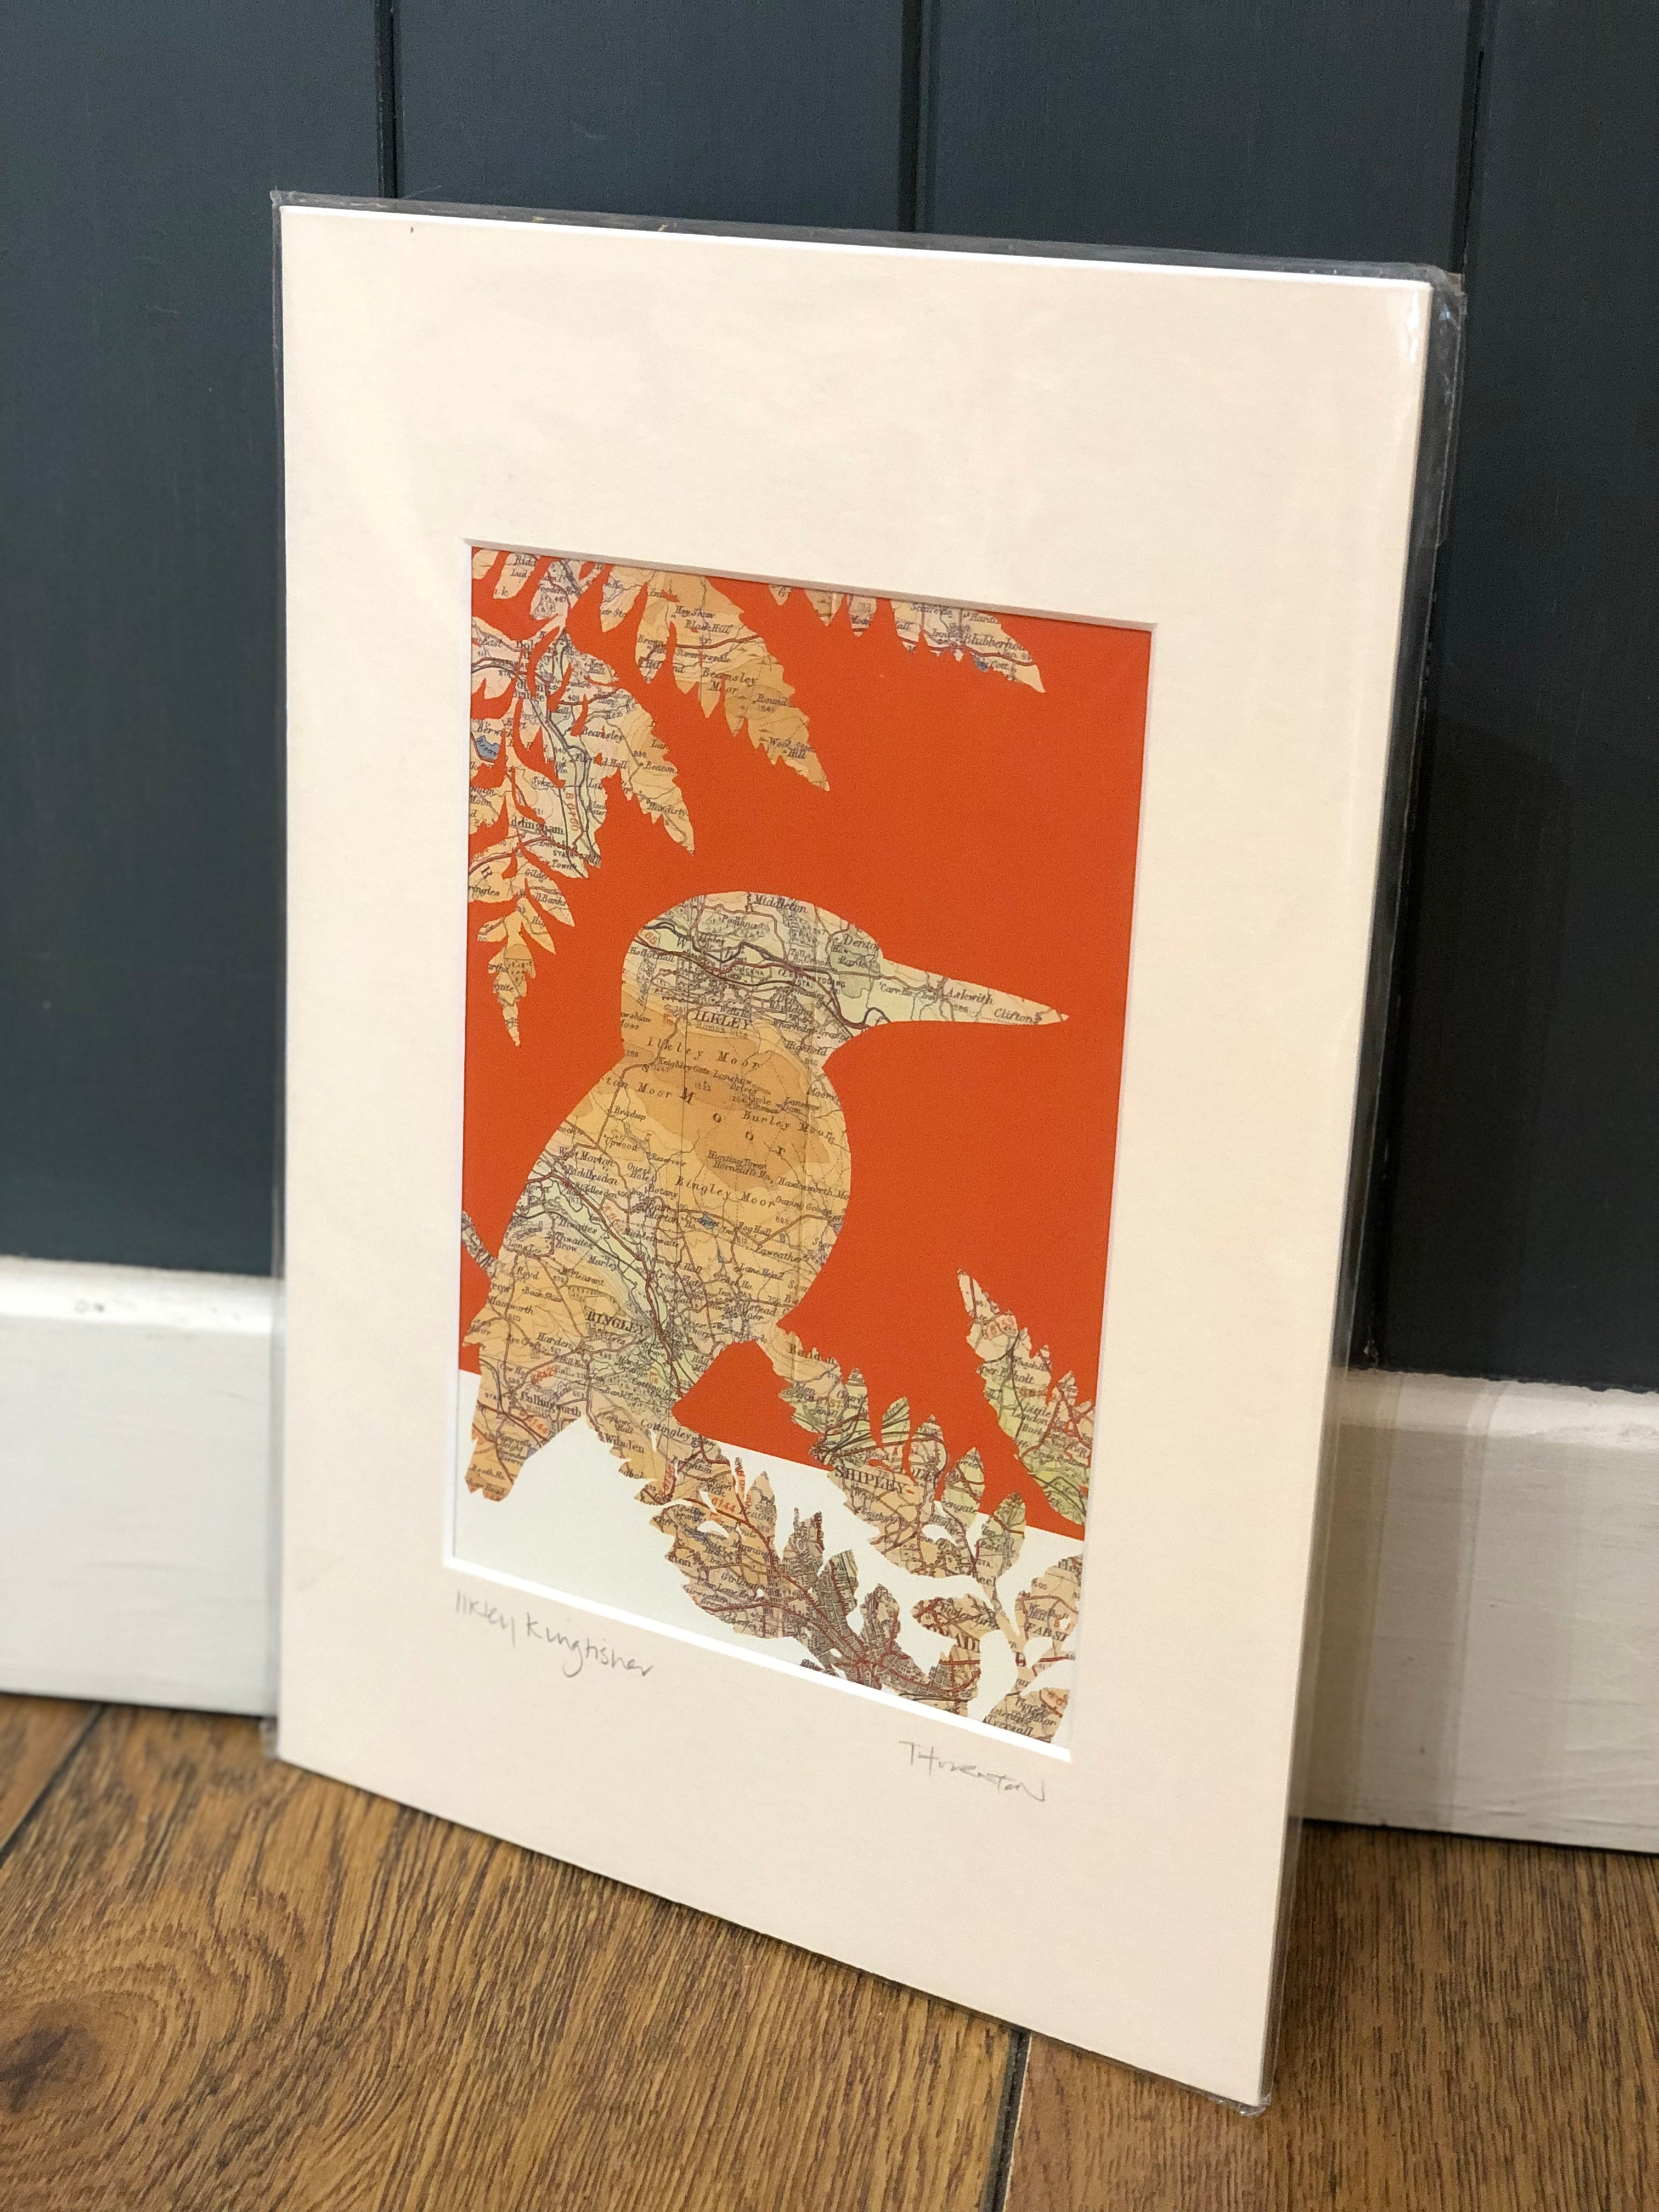 Framed Ilkley Kingfisher Picture